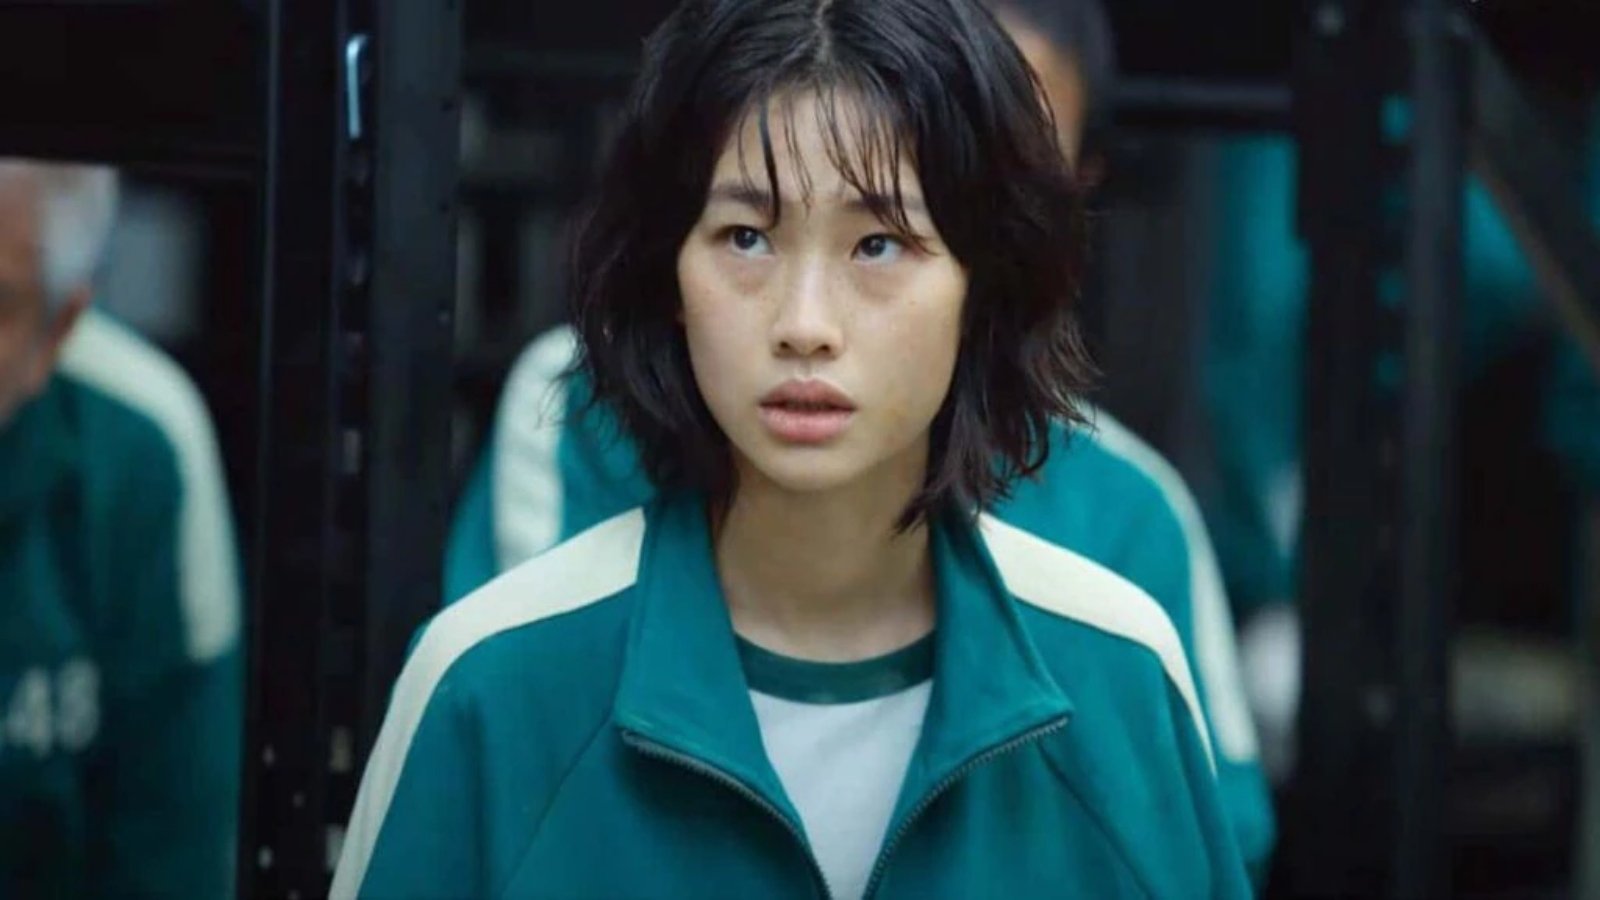 Jung Ho yeon Breakout Star of #39 Squid Game #39 Lands SAG Nomination